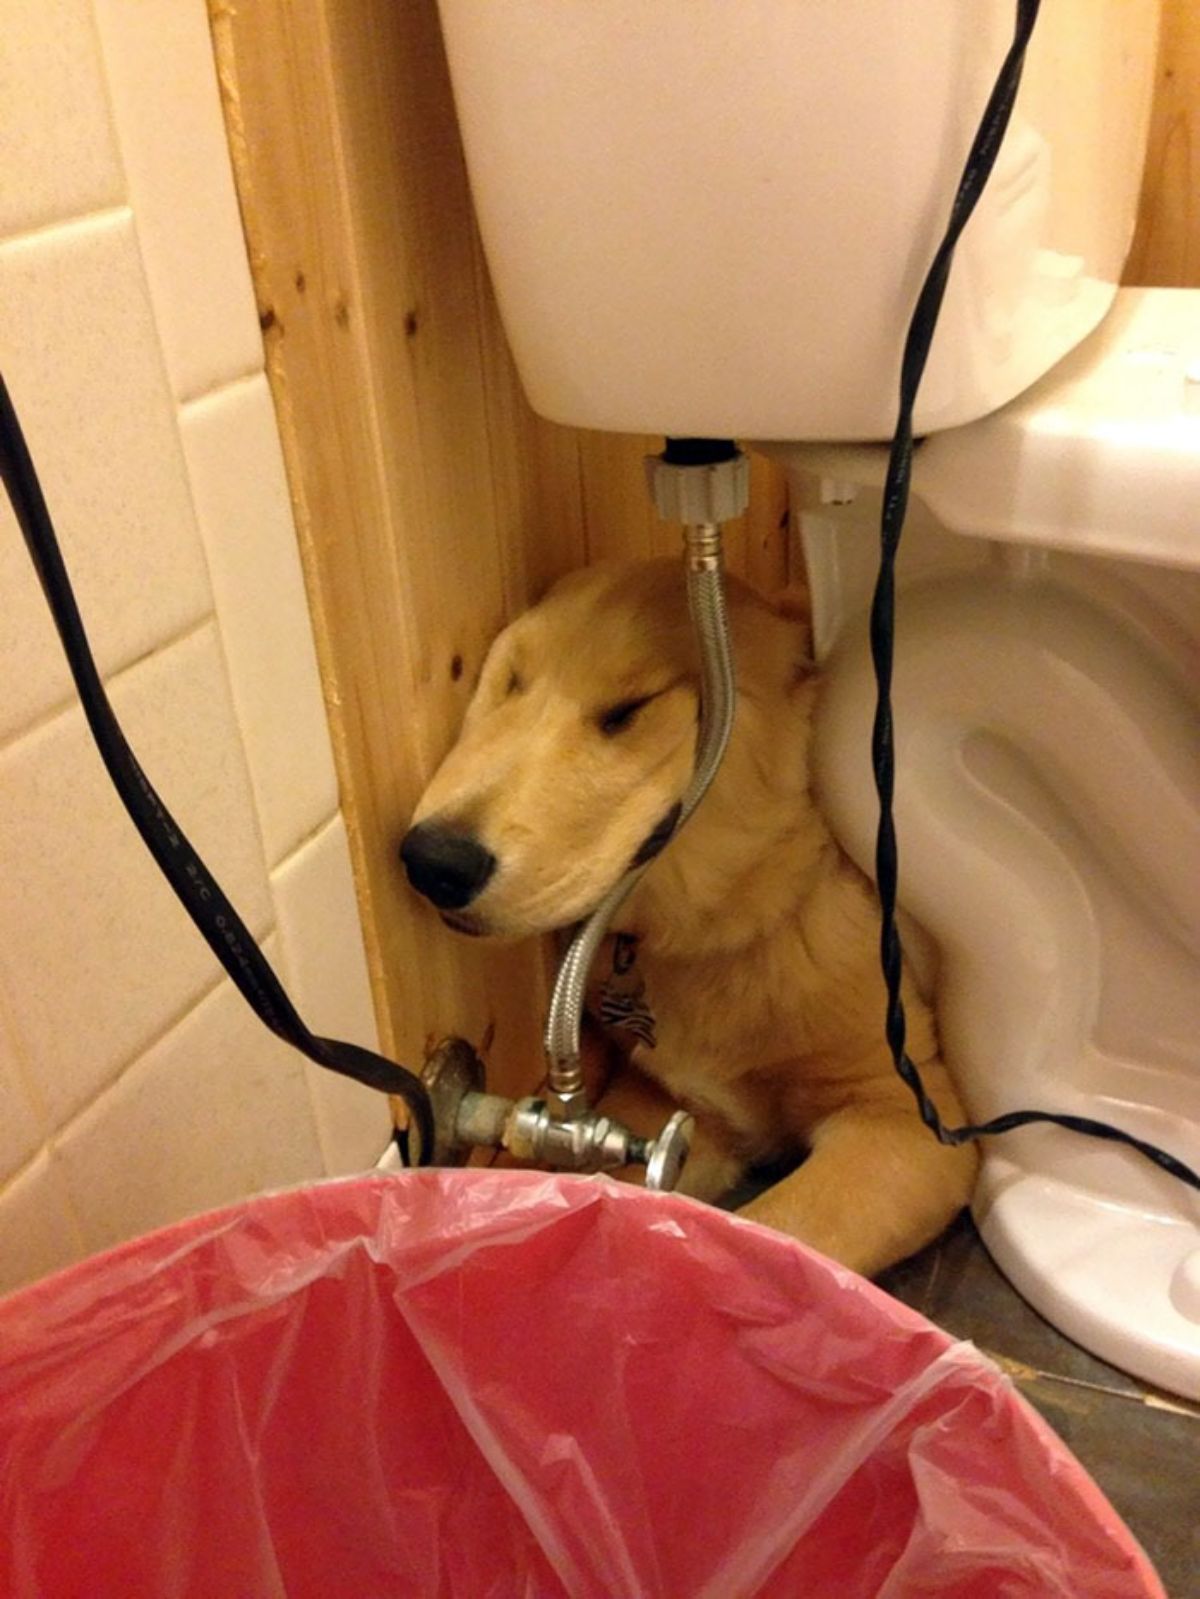 golden retriever sleeping with the face squished between a wall and a toilet